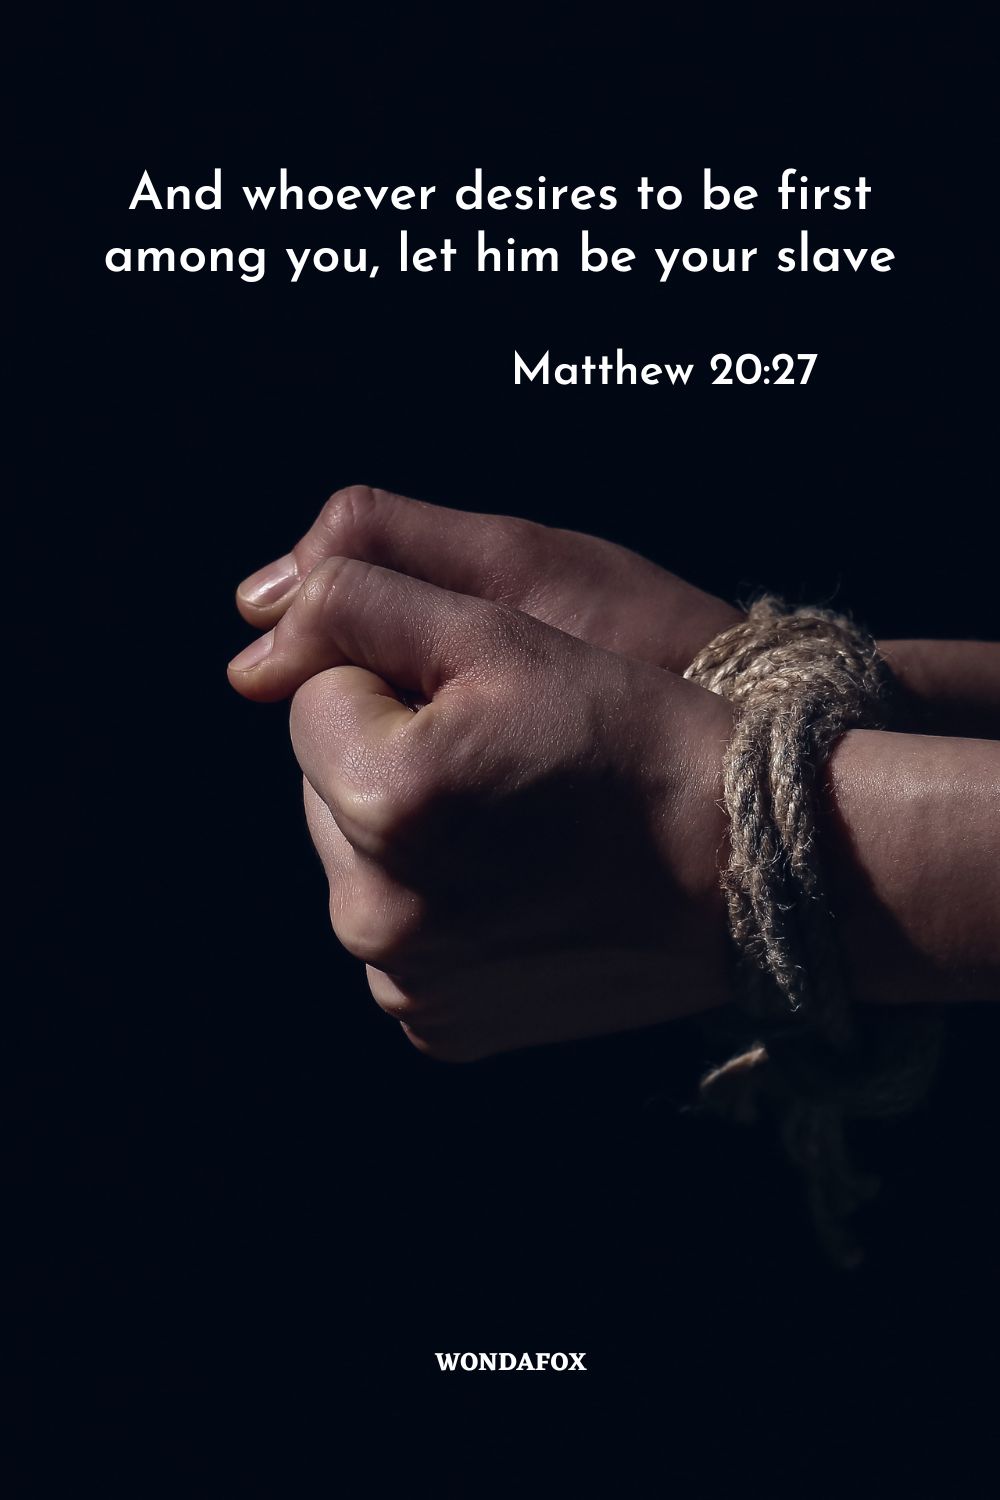 And whoever desires to be first among you, let him be your slave
Matthew 20:27